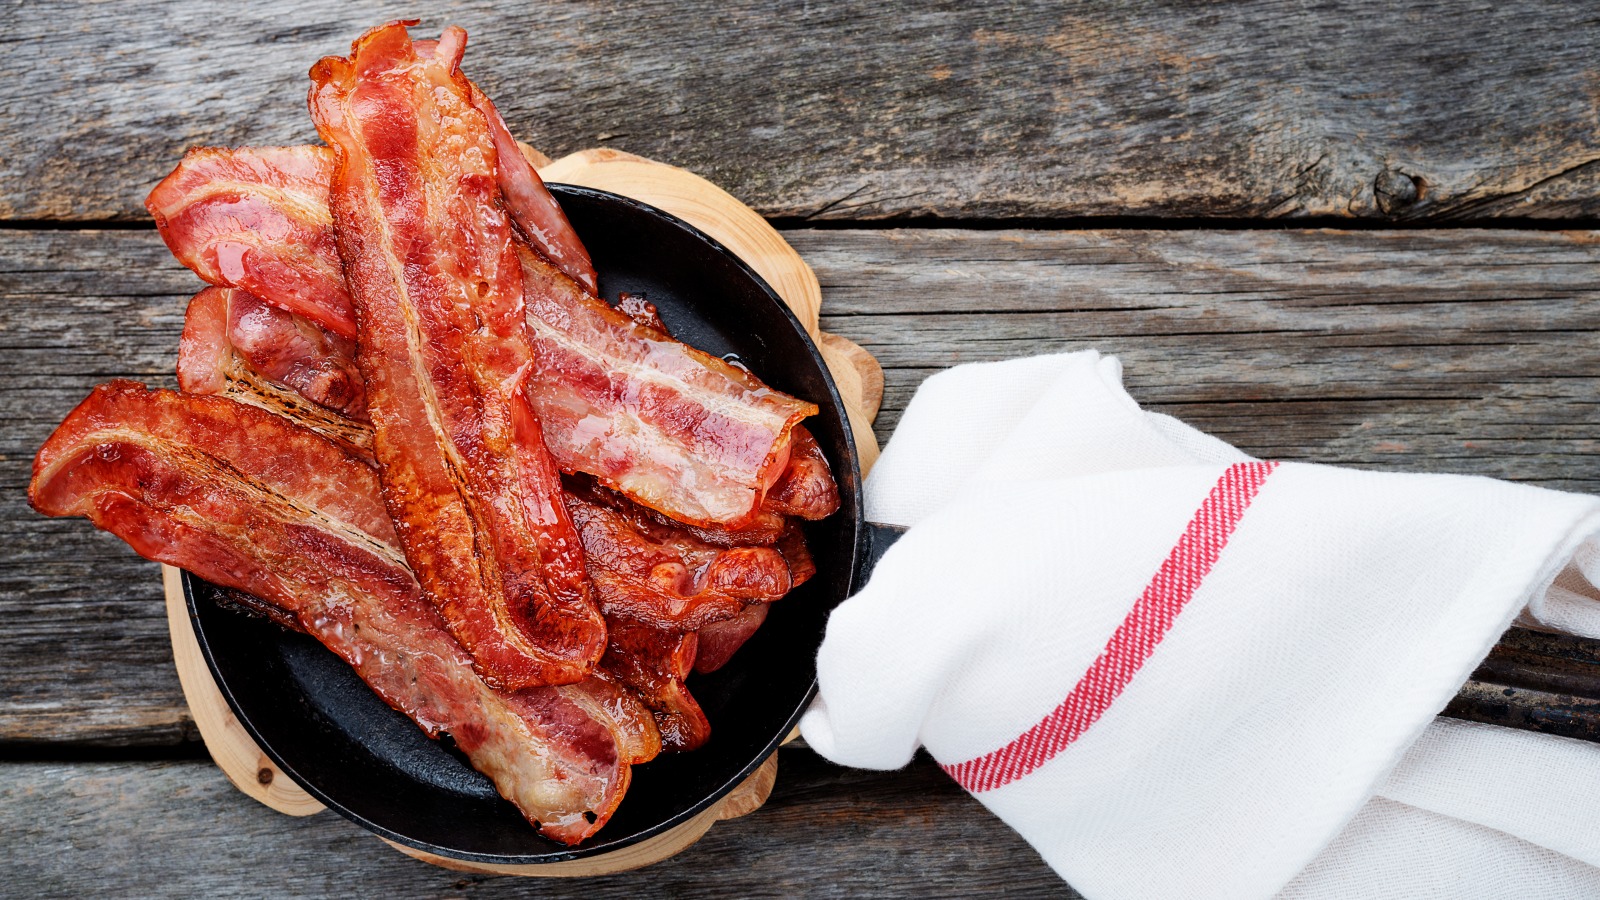 Here's You Should Vide Your Bacon